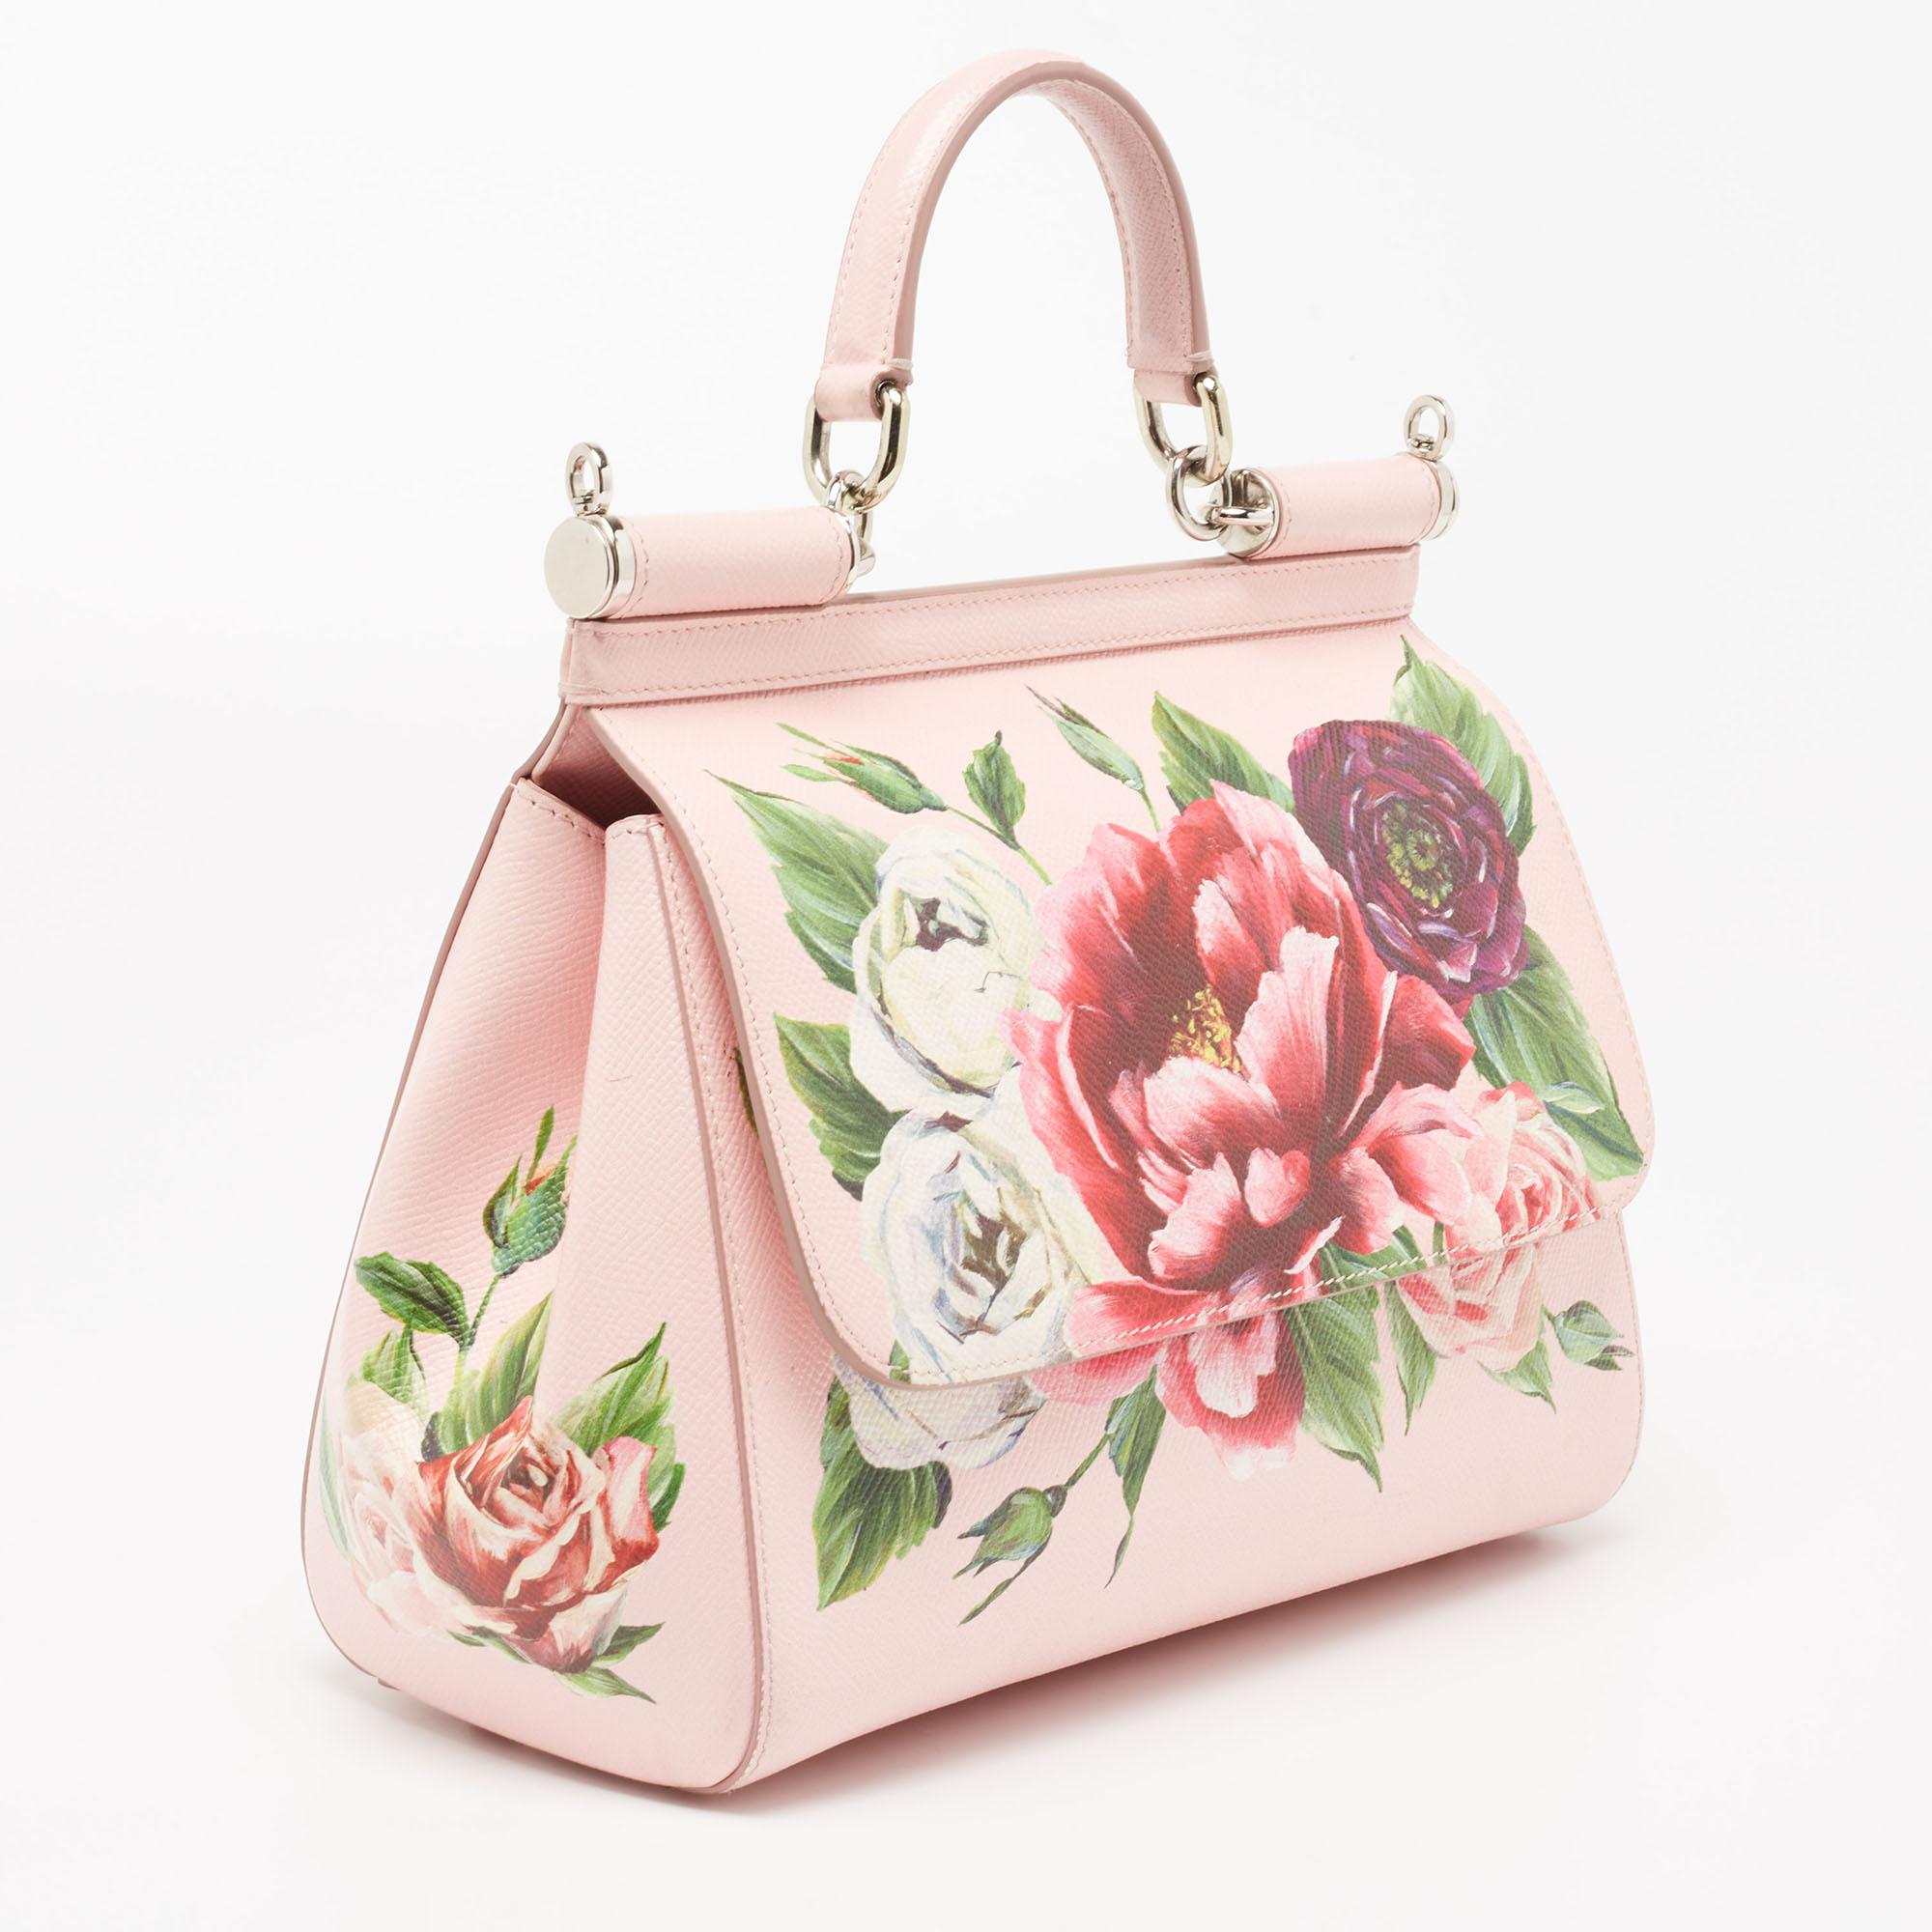 dolce and gabanna pink tote